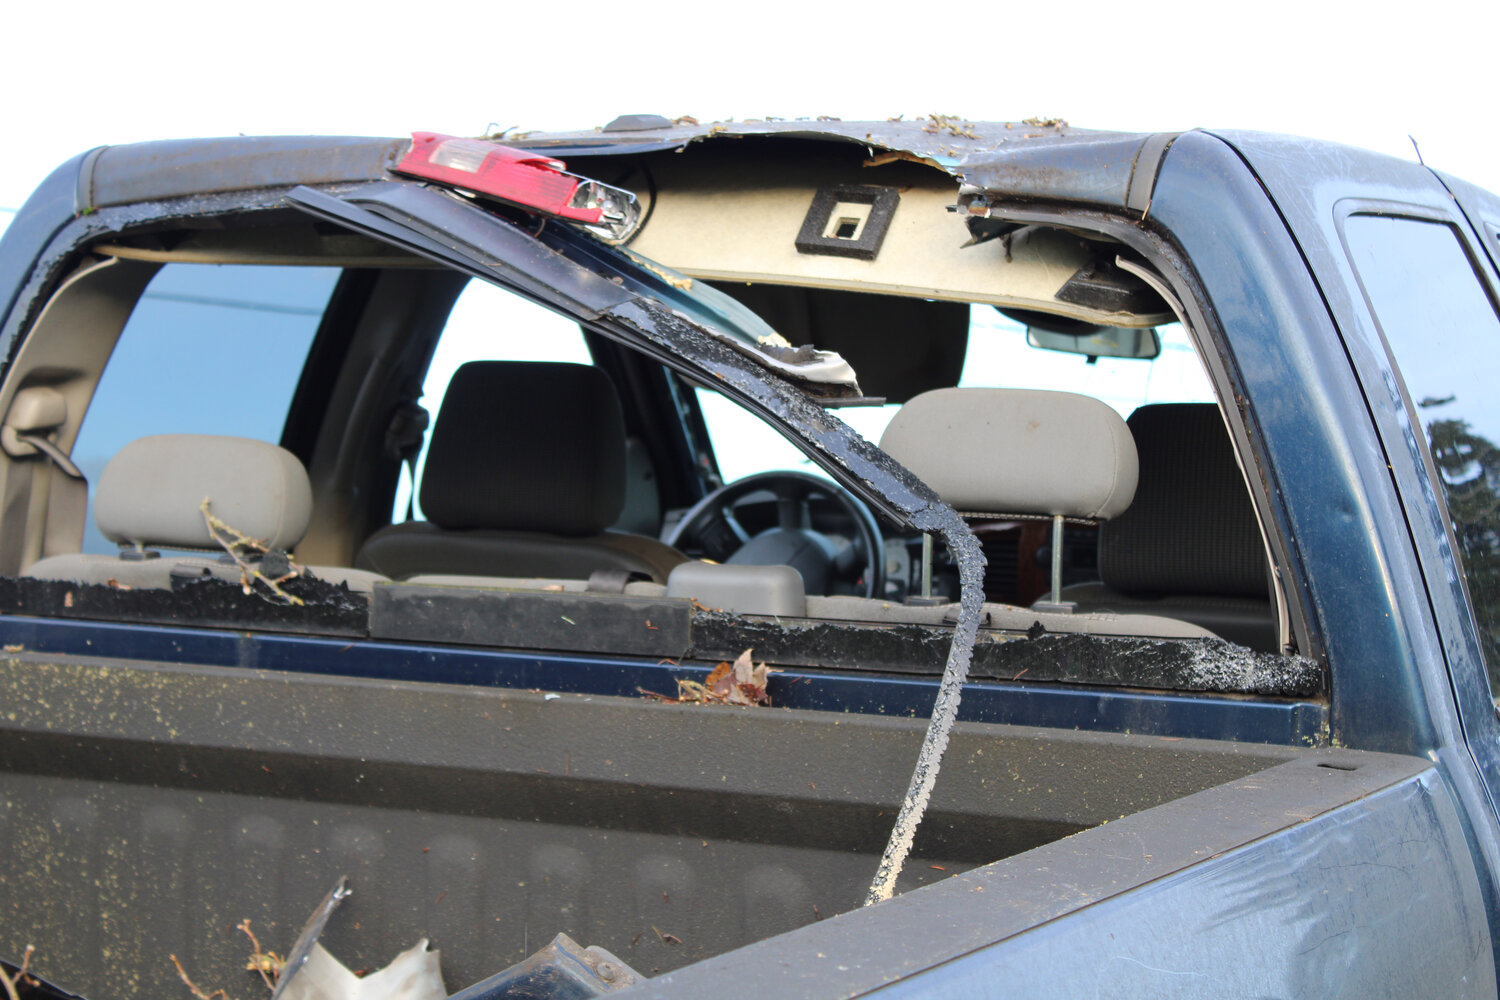 The Dodge Ram truck lost its rear mirror and suffered damage to its third brake light after crashing into a sign, a tree and a lamp post on Jan. 30.